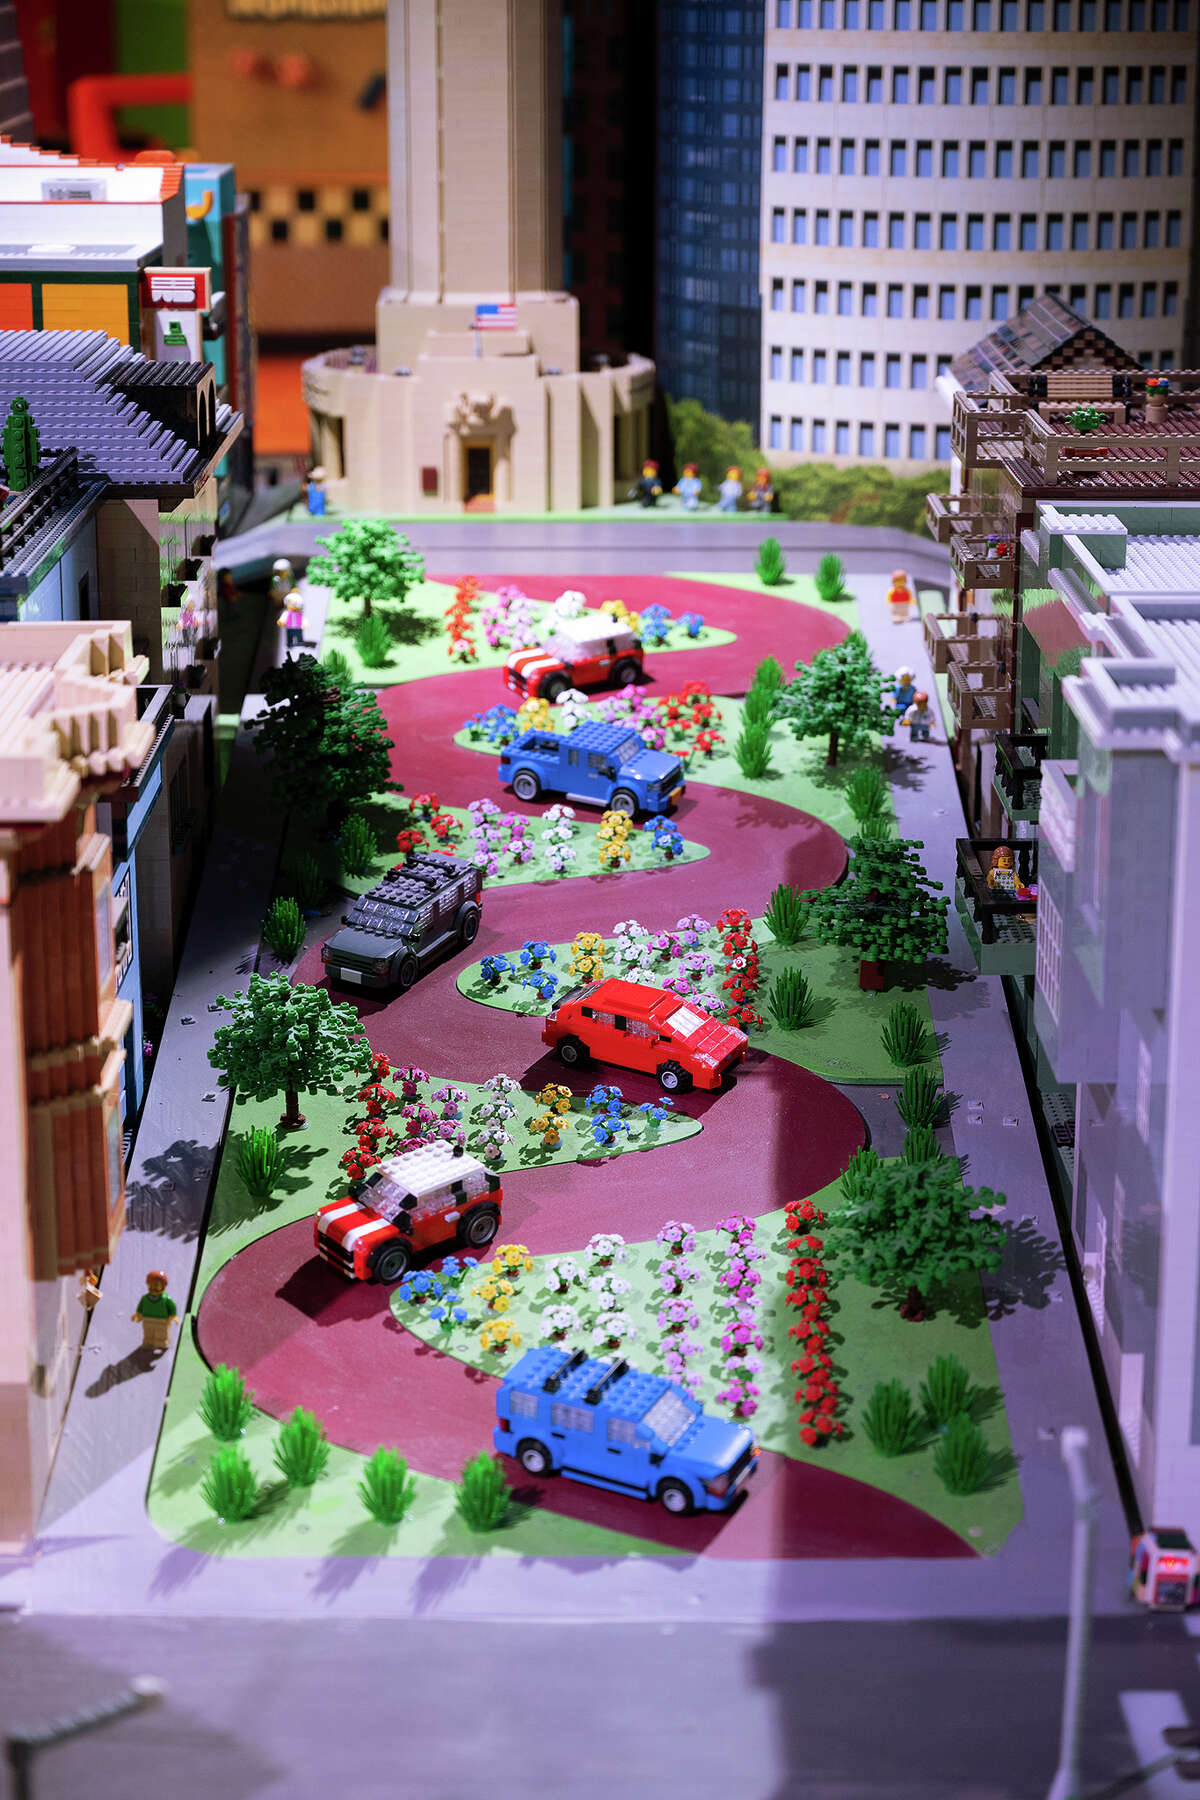 Legoland Discovery Center Bay Area's Miniland isn't exactly geographically accurate (here's Coit Tower on top of Lombard Street).